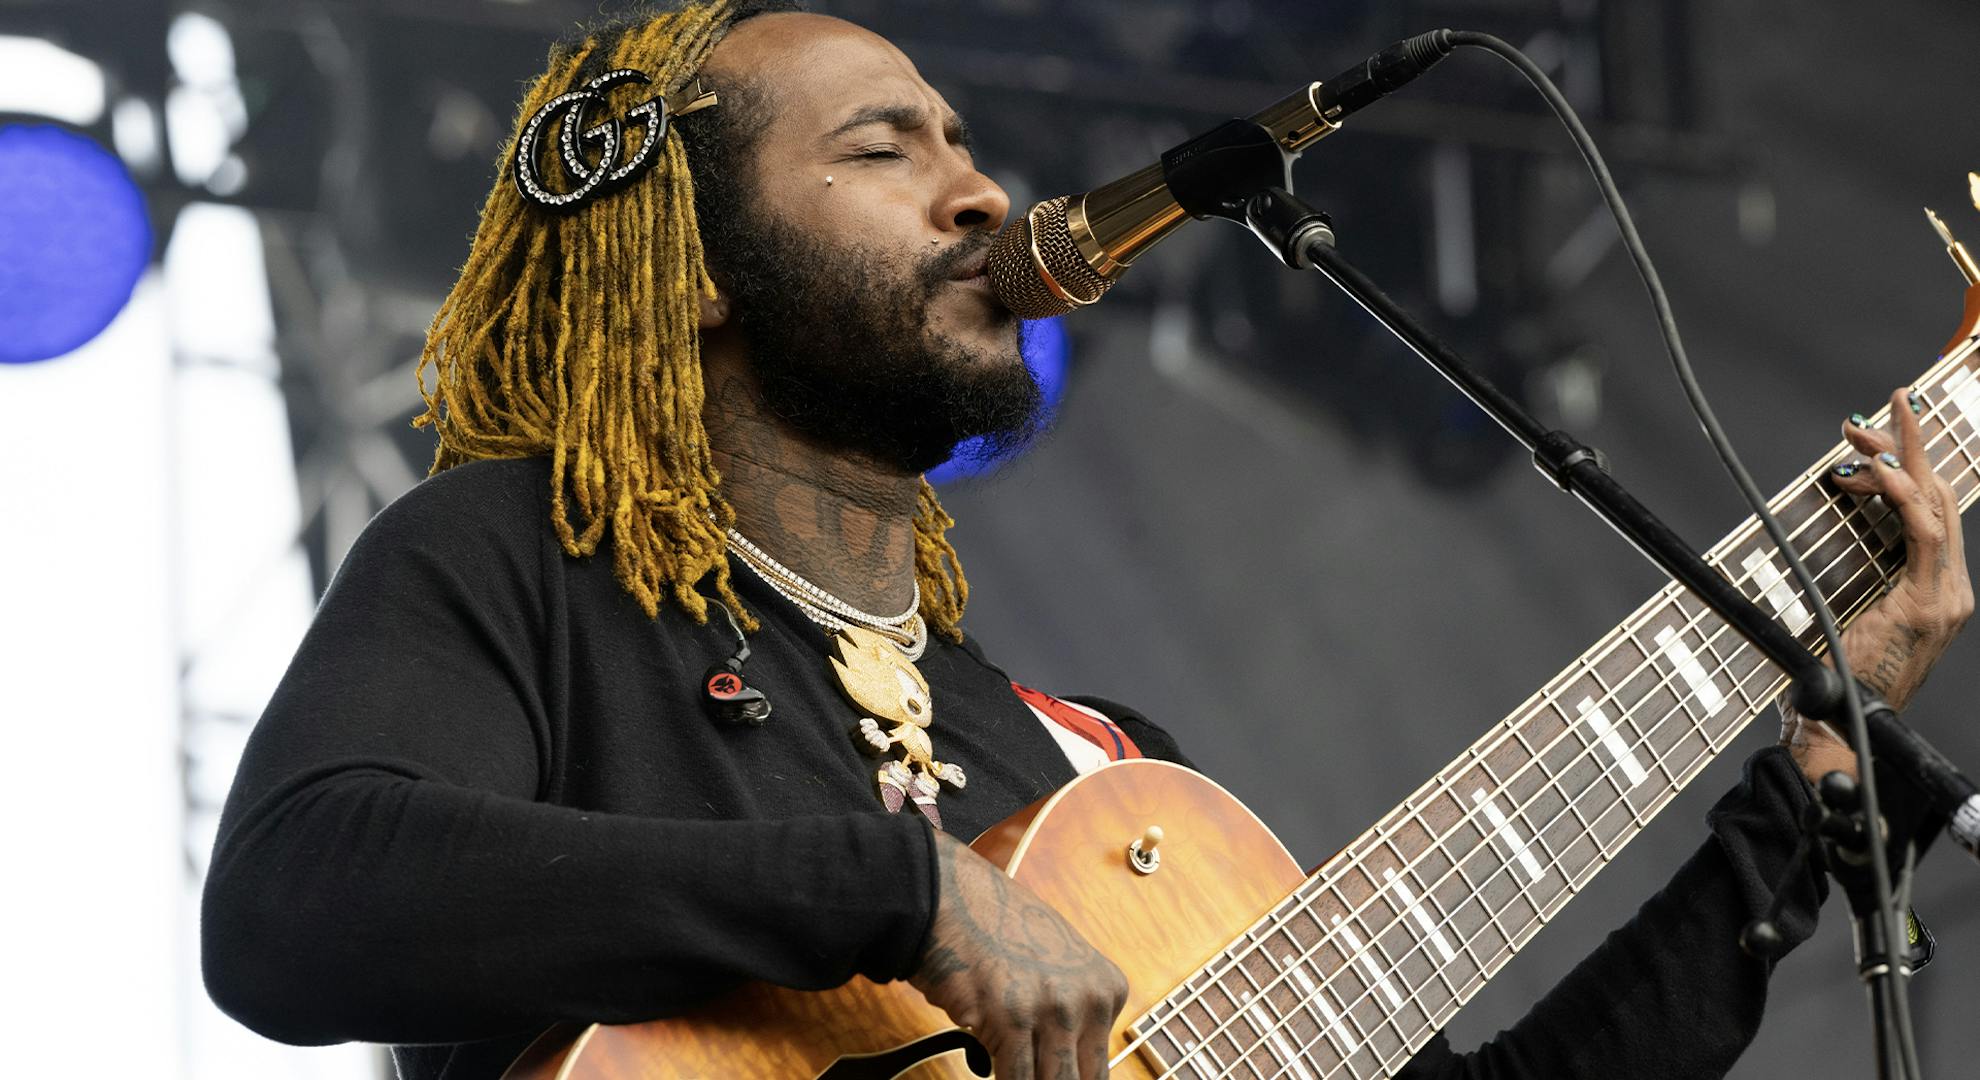 Bass player/singer Thundercat performs onstage during the Smokin Grooves Festival at Los Angeles State Historic Park on March 19, 2022 in Los Angeles, California. (Photo by Scott Dudelson/Getty Images)